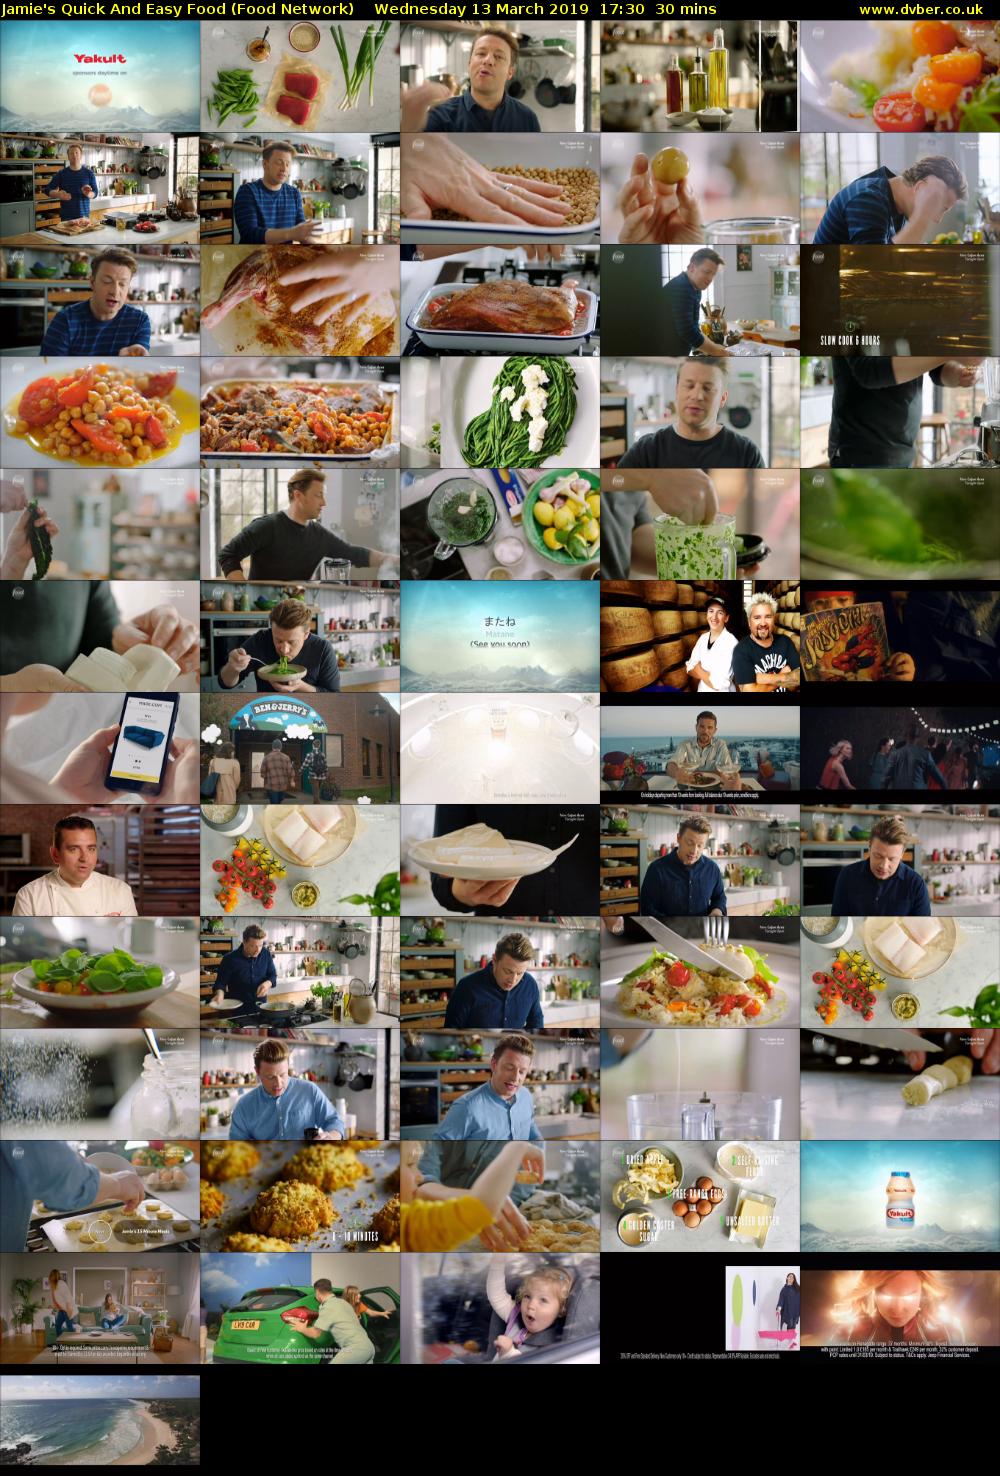 Jamie's Quick And Easy Food (Food Network) Wednesday 13 March 2019 17:30 - 18:00